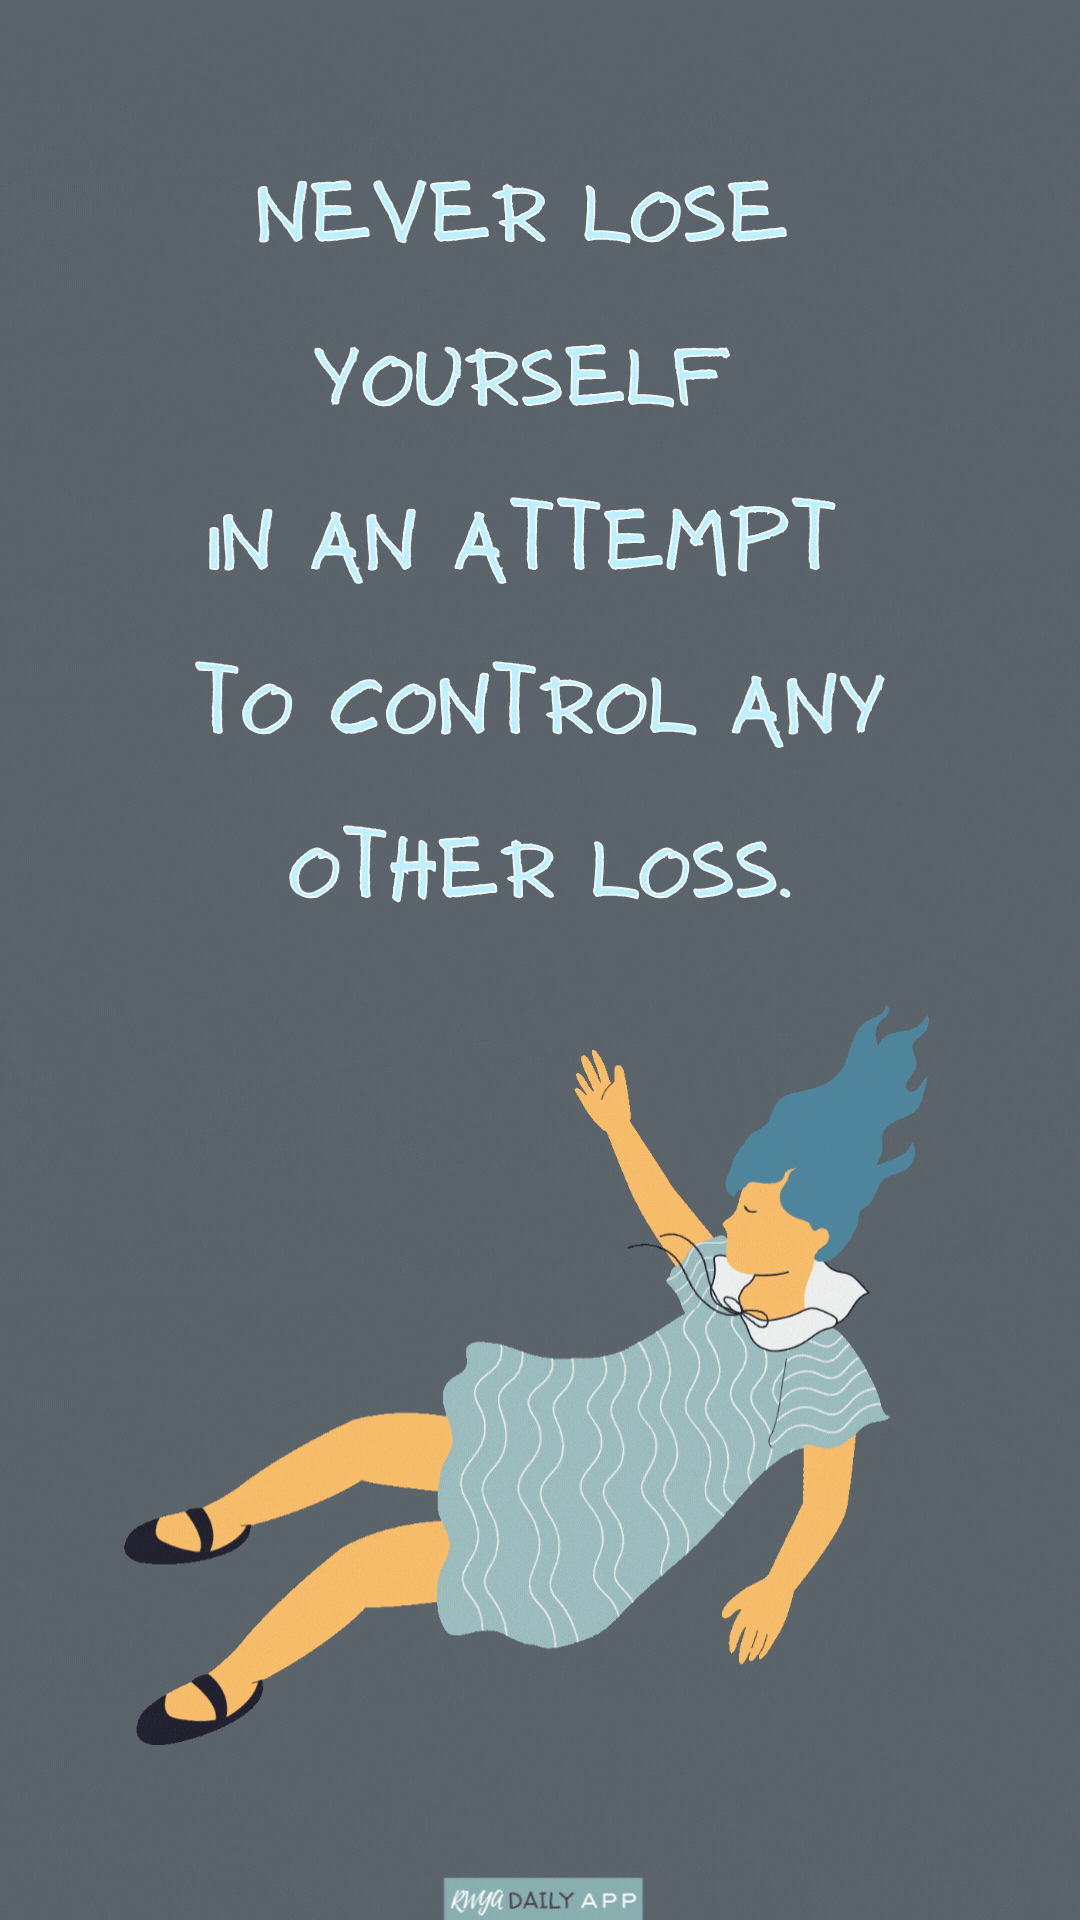 Never lose yourself in an attempt to control any other loss. 